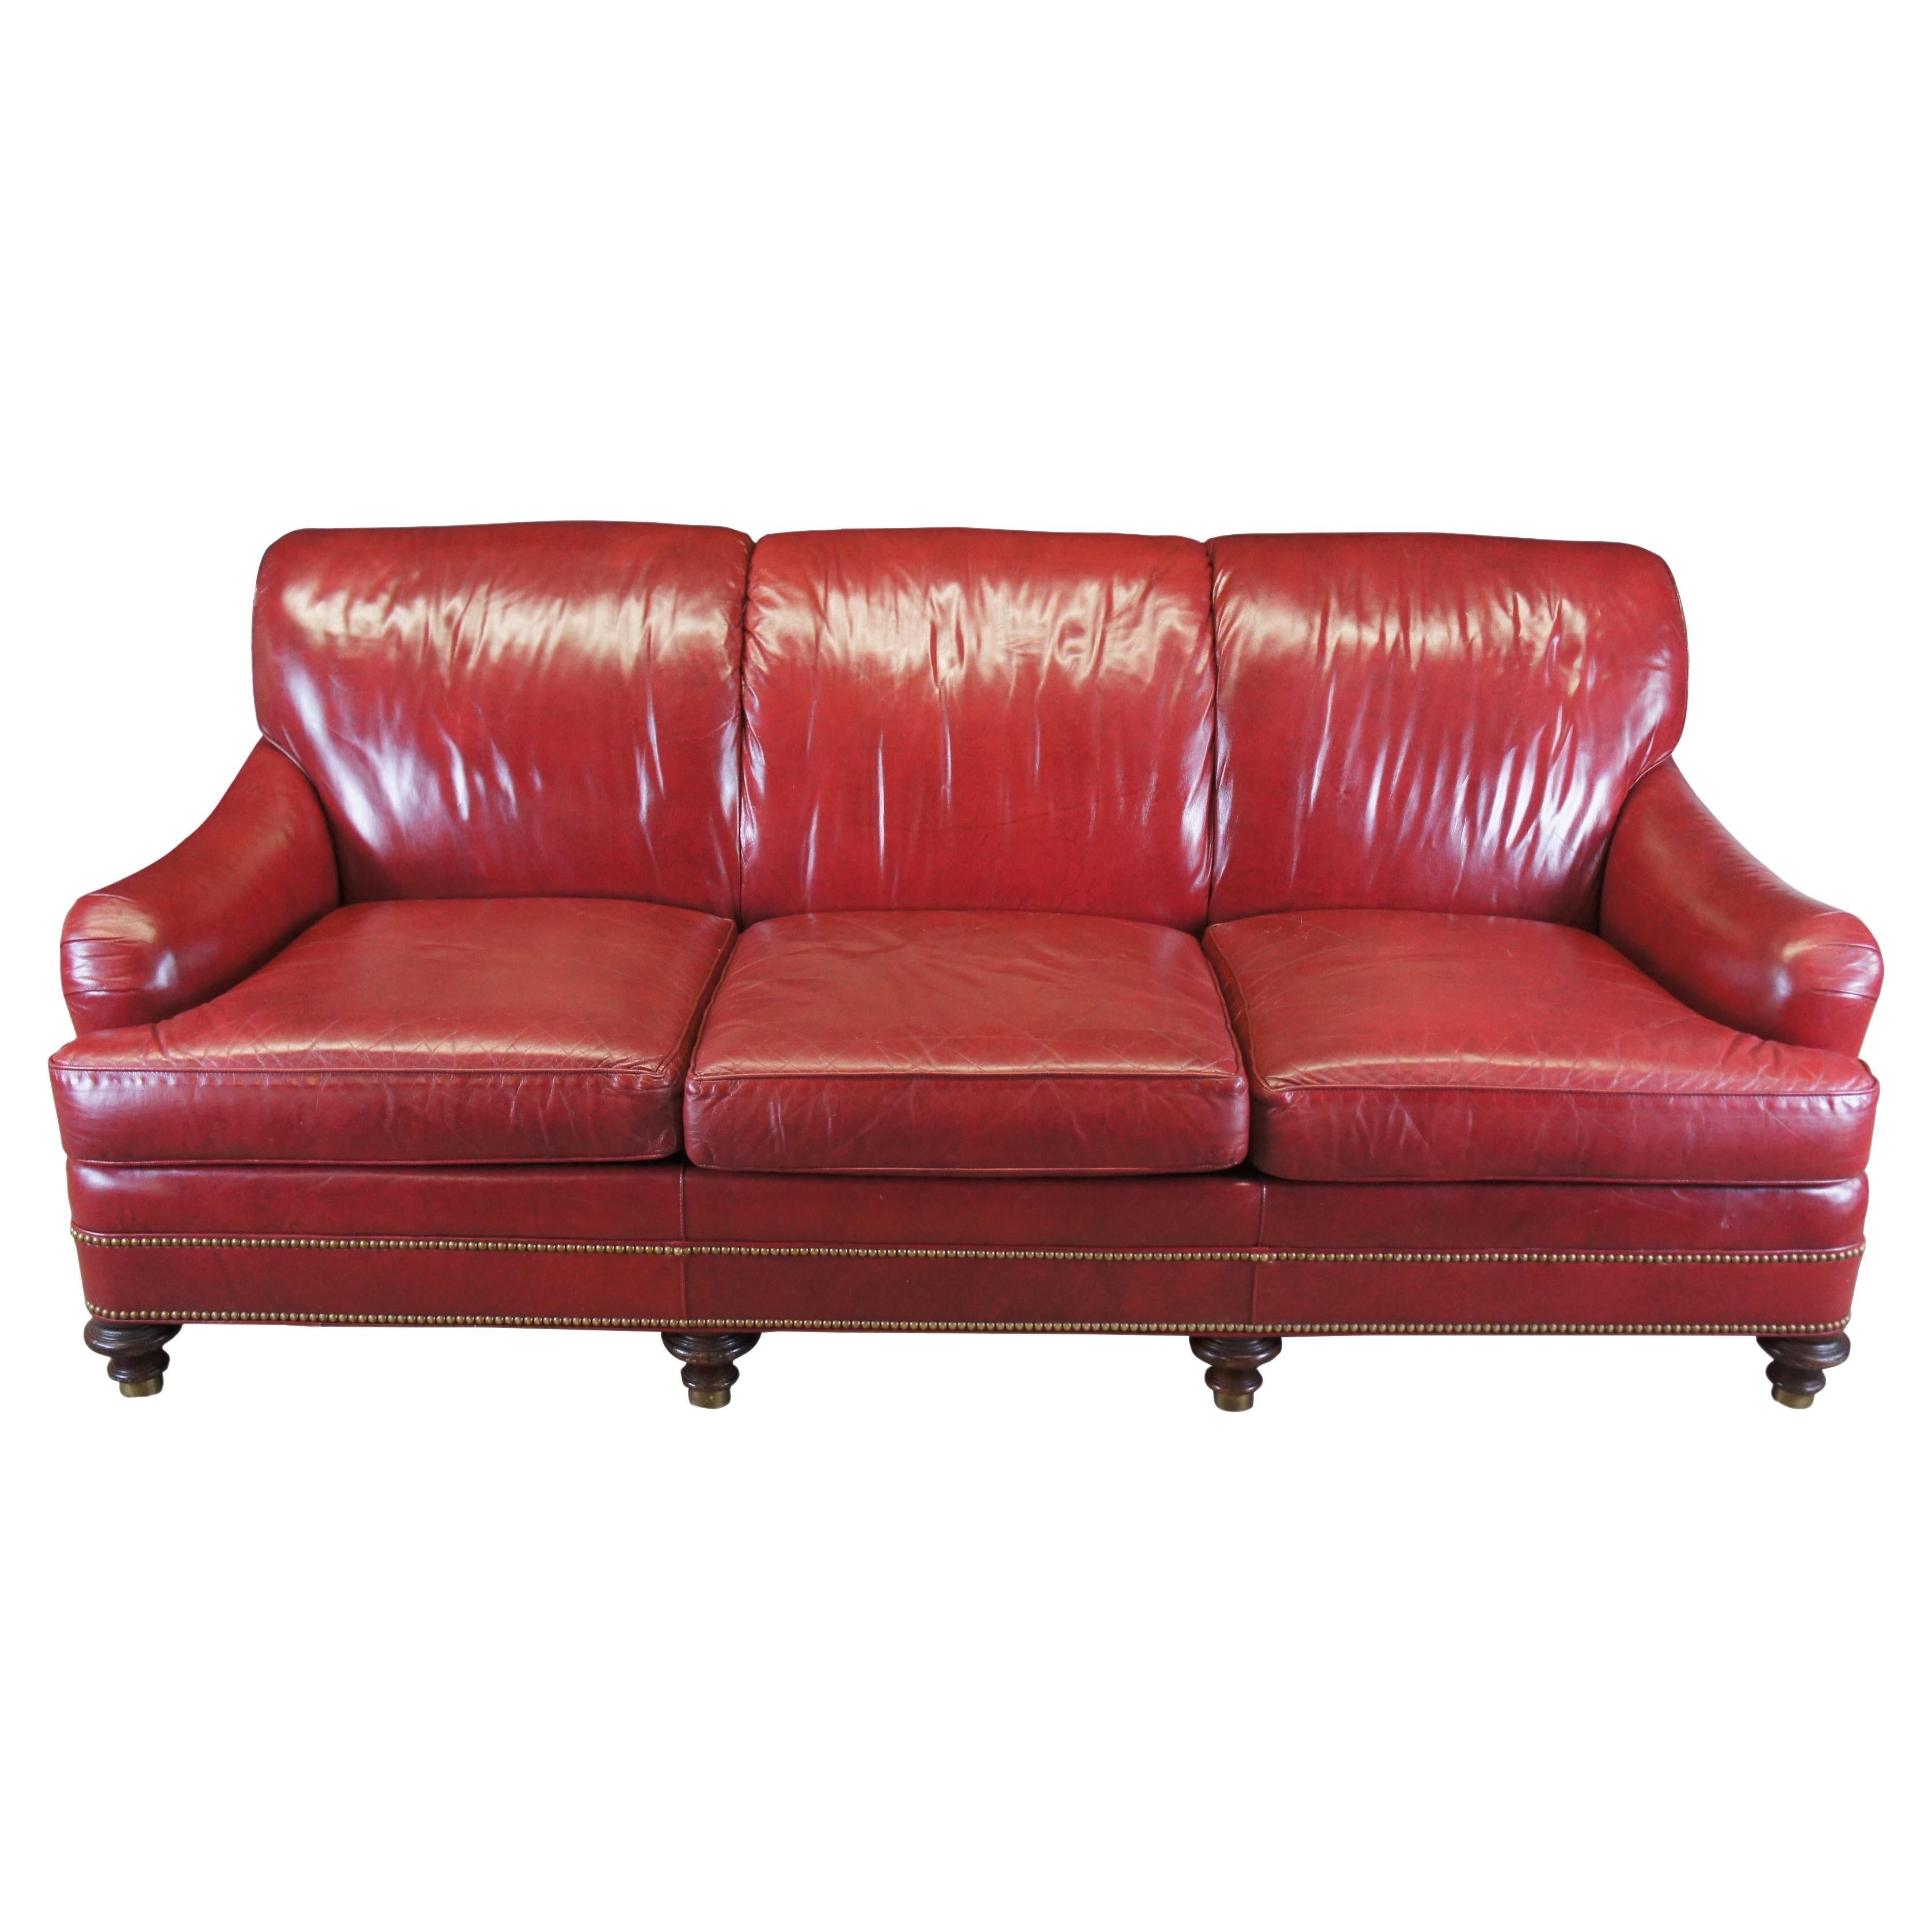 Vintage Hancock & Moore English Style Red Leather Slope Arm 3 Seater Sofa Couch